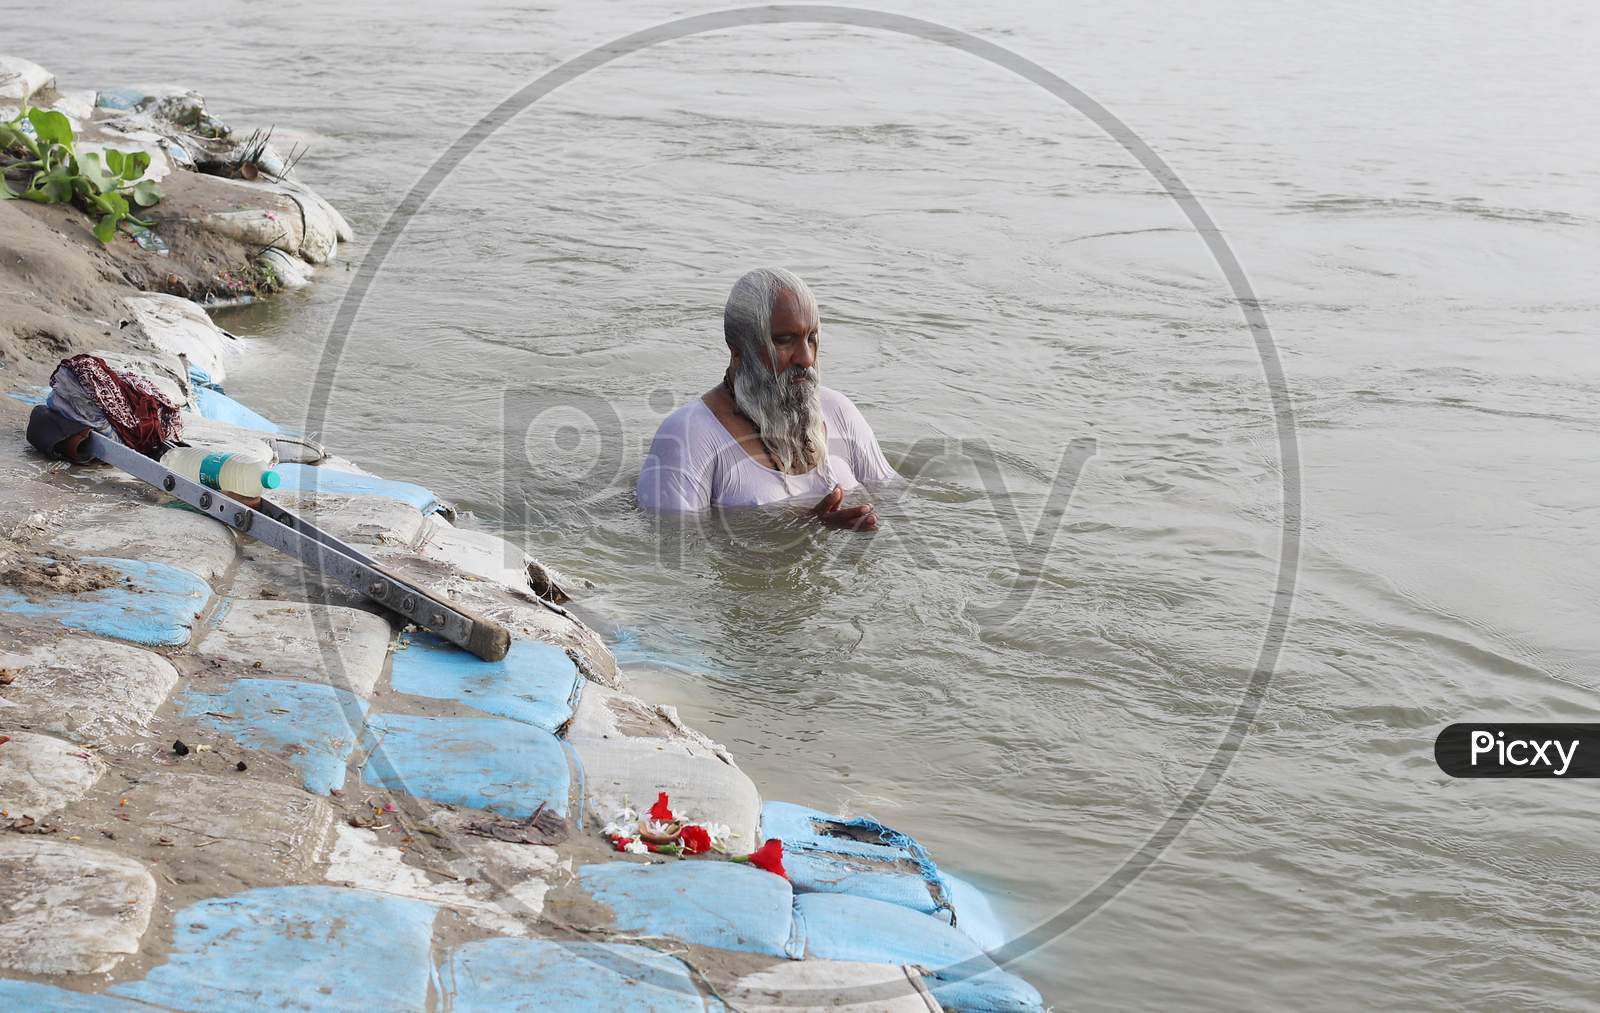 A Sadhu Or Holy Man Offering Prayers After Takes Holy Dip In The Sangam, Confluence Of Three Rivers, The Ganga, The Yamuna And Mythical Saraswati After Lunar Eclipse Or Chandra Grahan In Prayagraj, June 6, 2020.